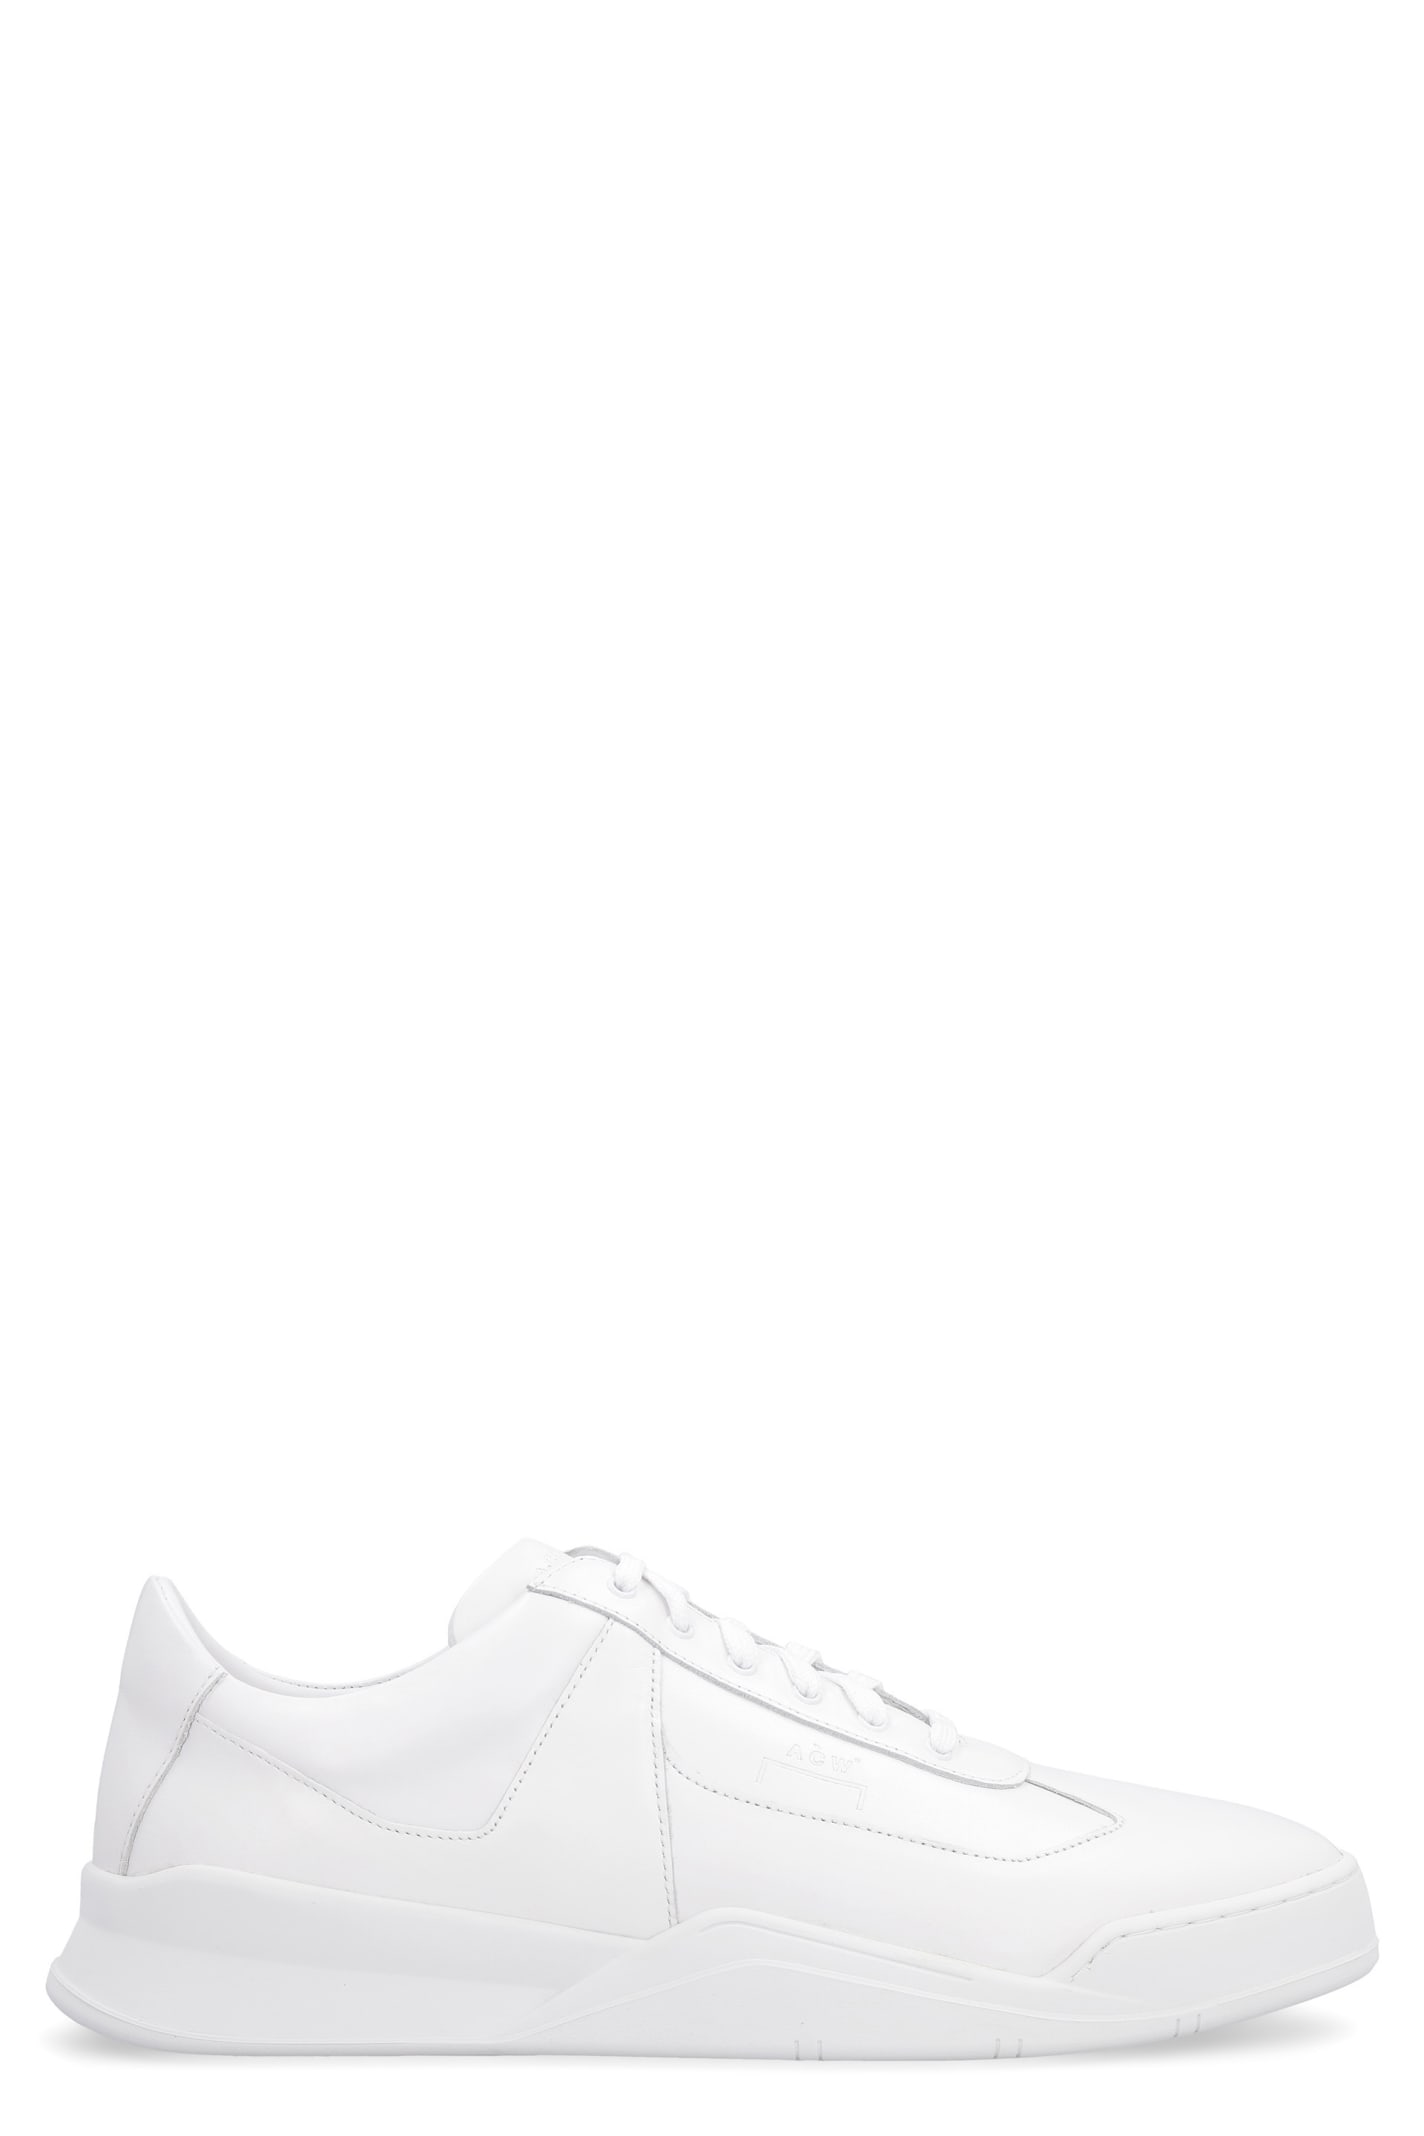 A-COLD-WALL Leather Low-top Sneakers